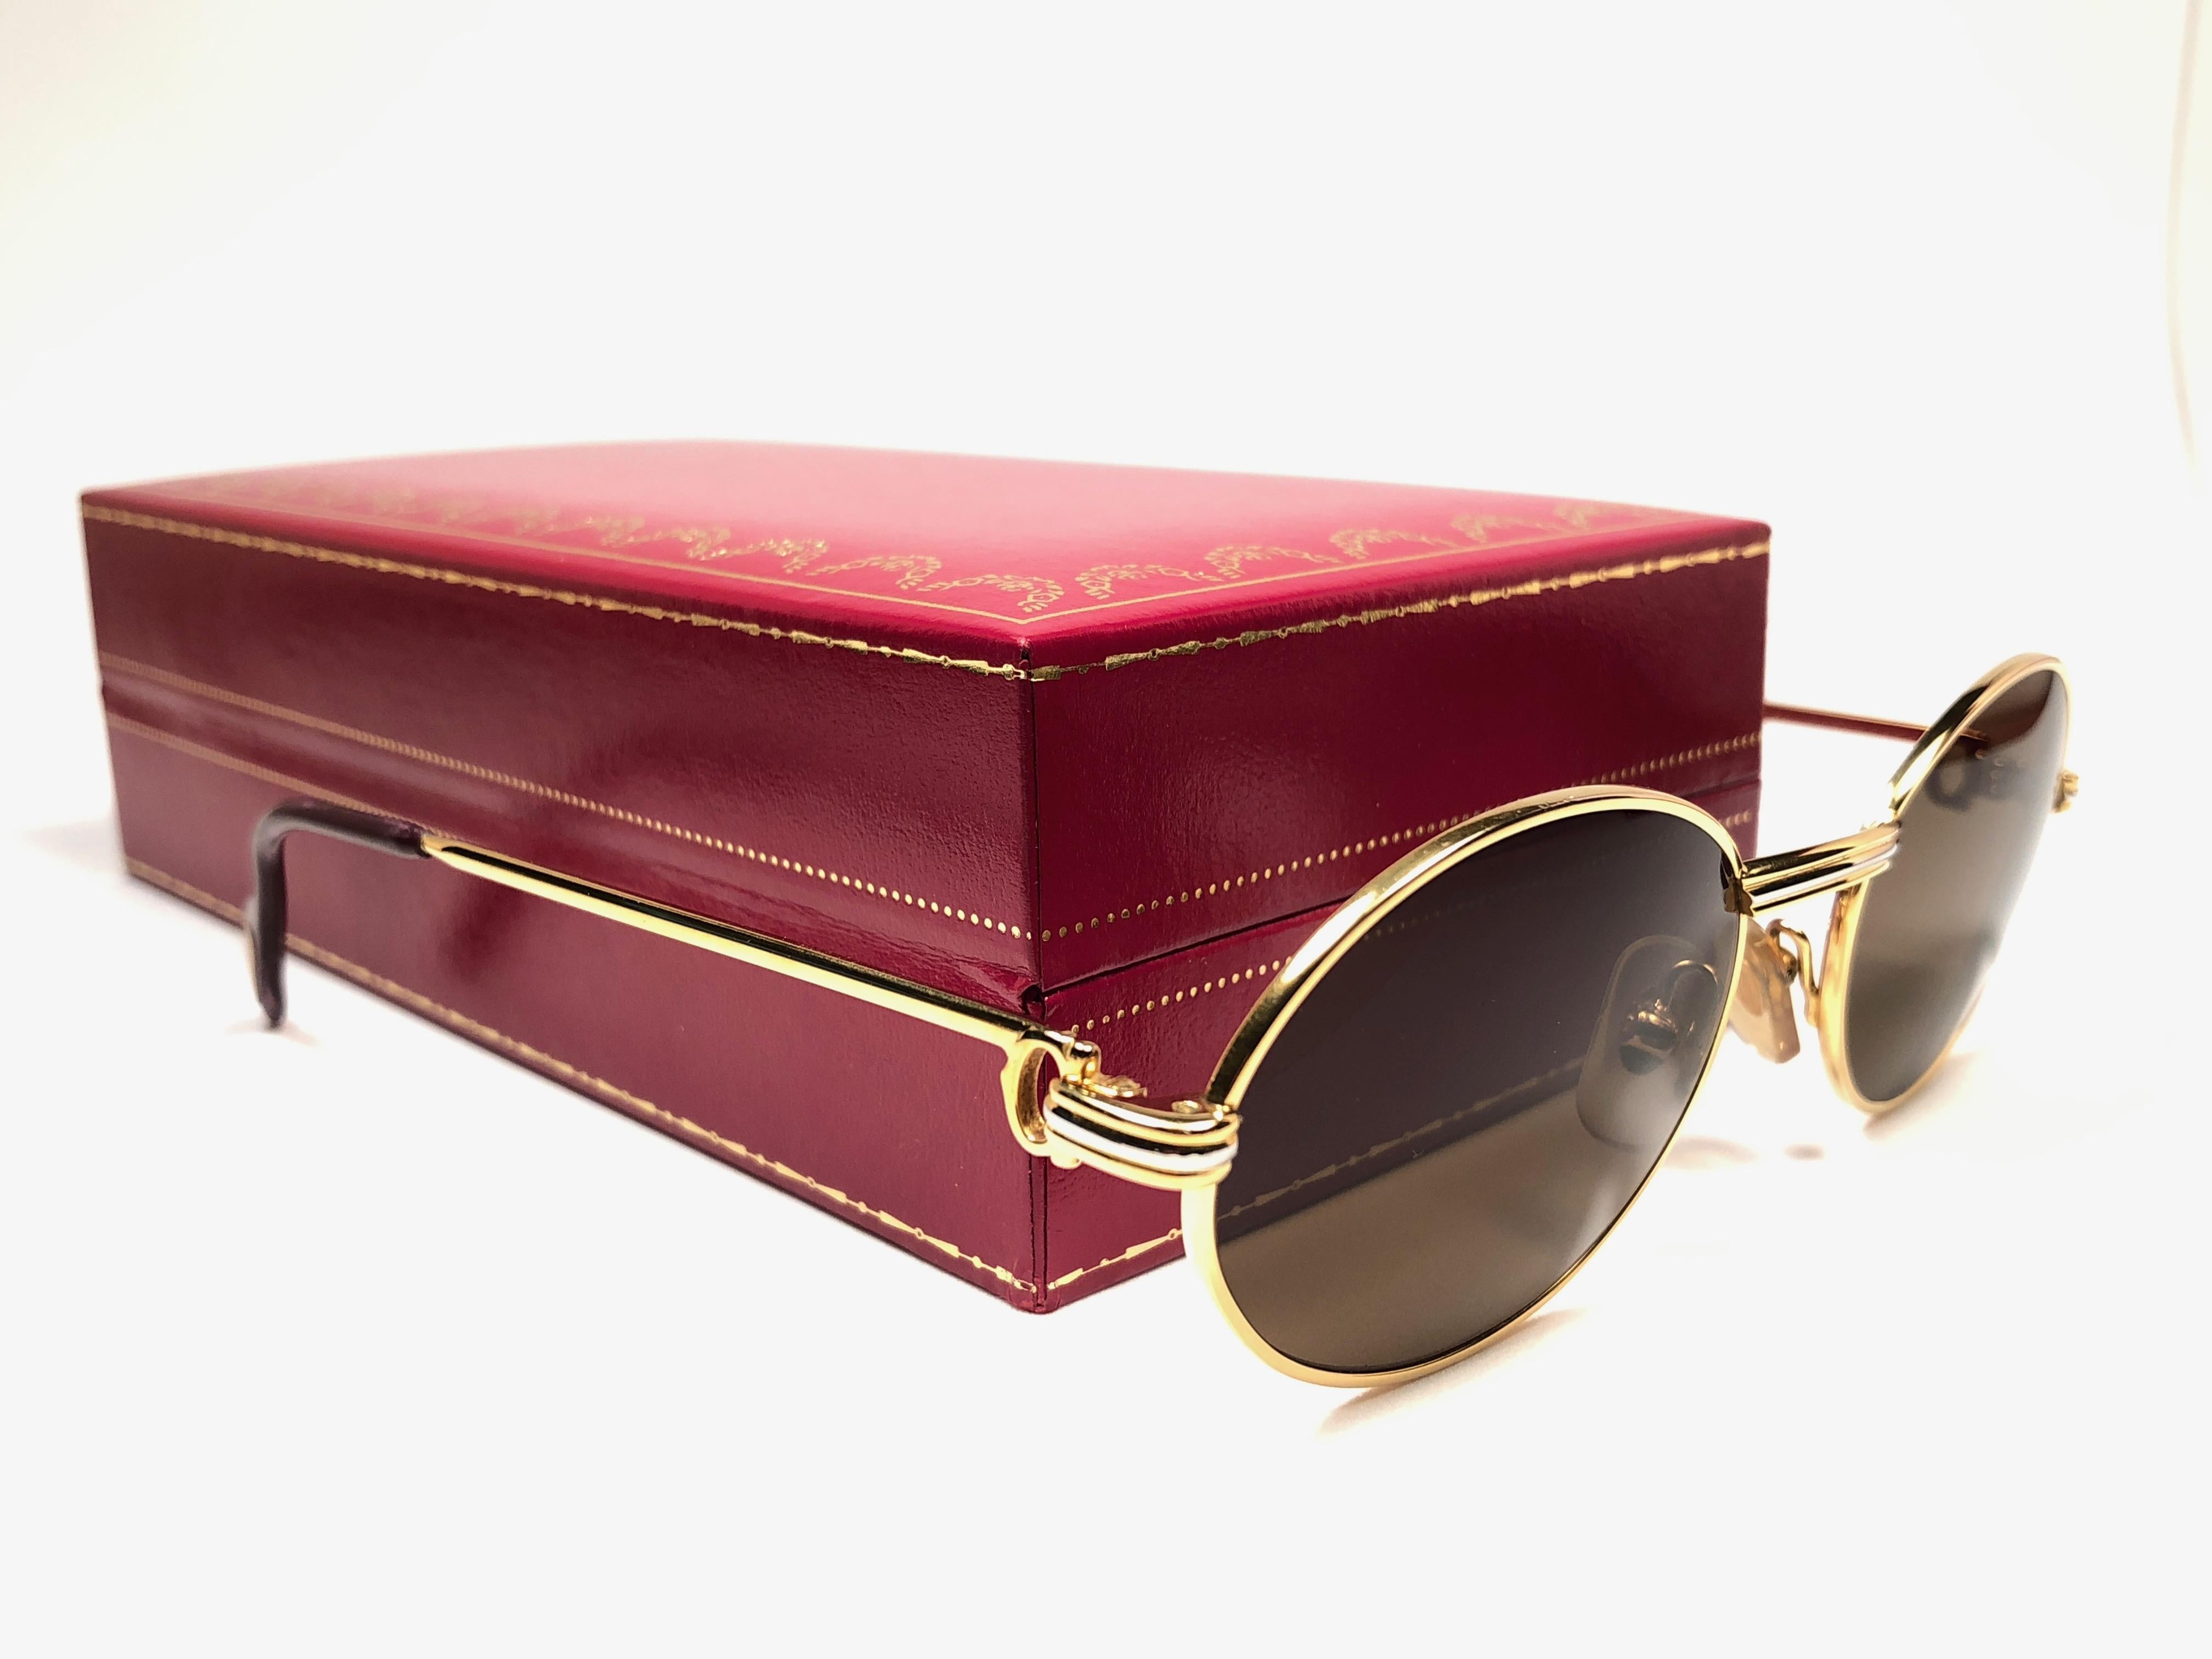 New Vintage Cartier Oval St Honore Gold 51mm 18k Plated Sunglasses France 1